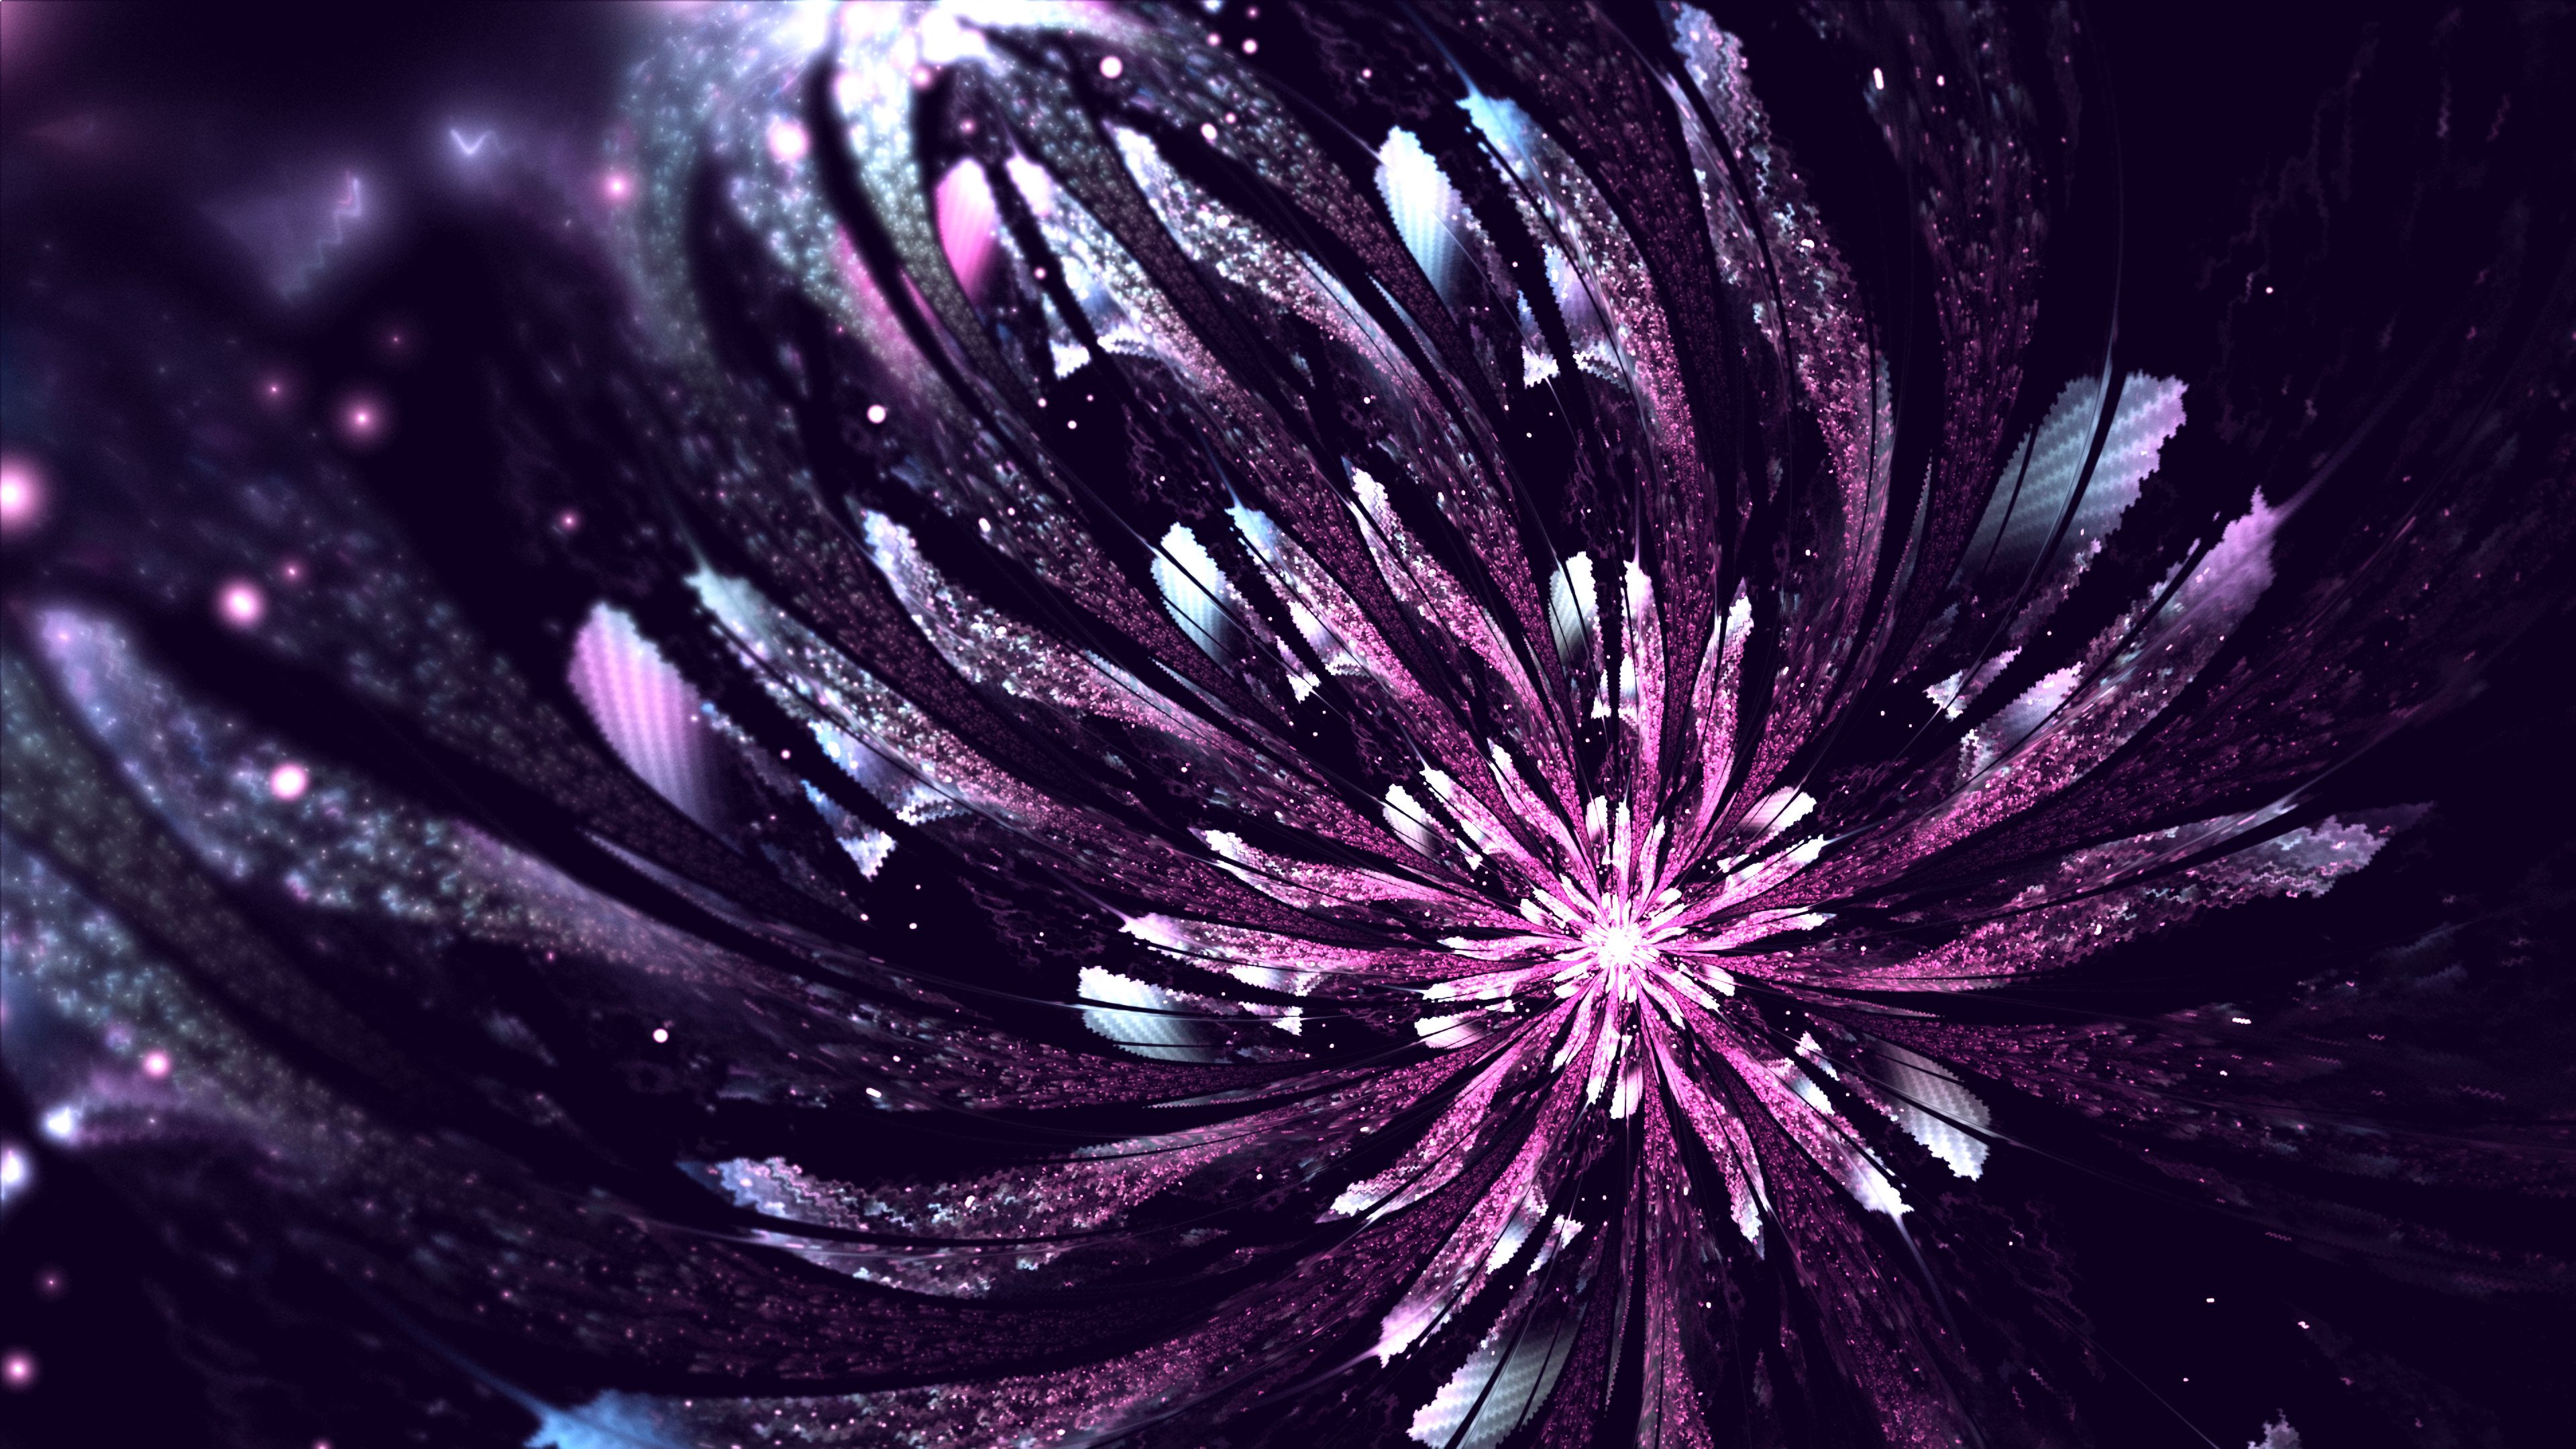 65083 download wallpaper violet, abstract, flower, fractal, glow, purple, digital screensavers and pictures for free